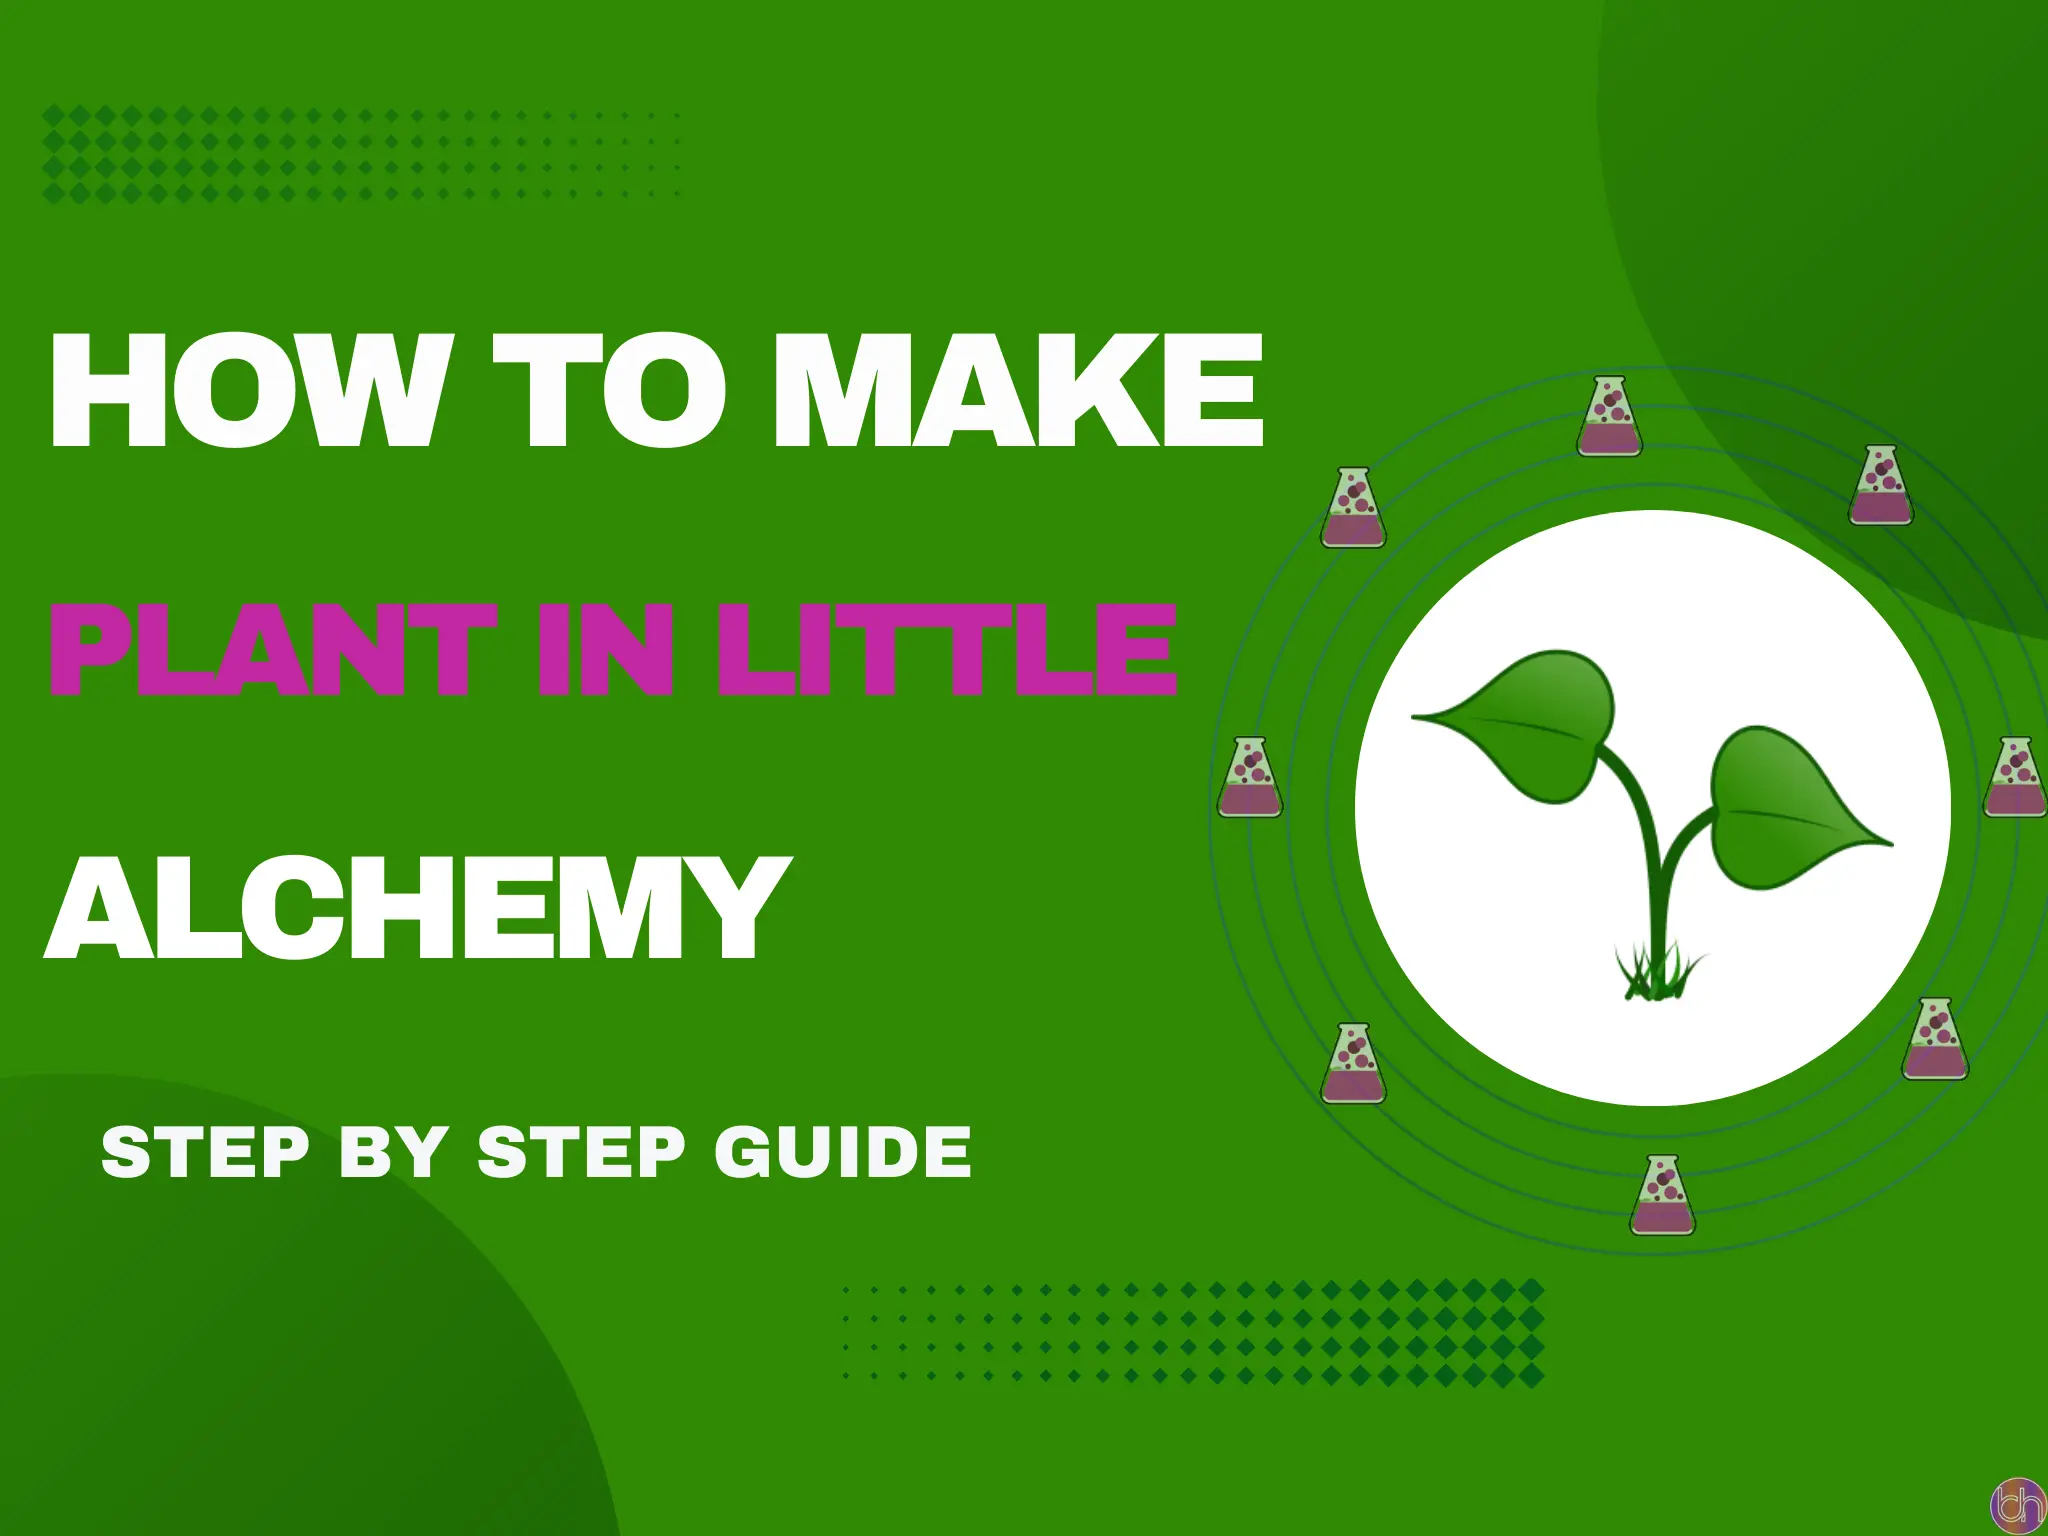 How to make Plant in little alchemy